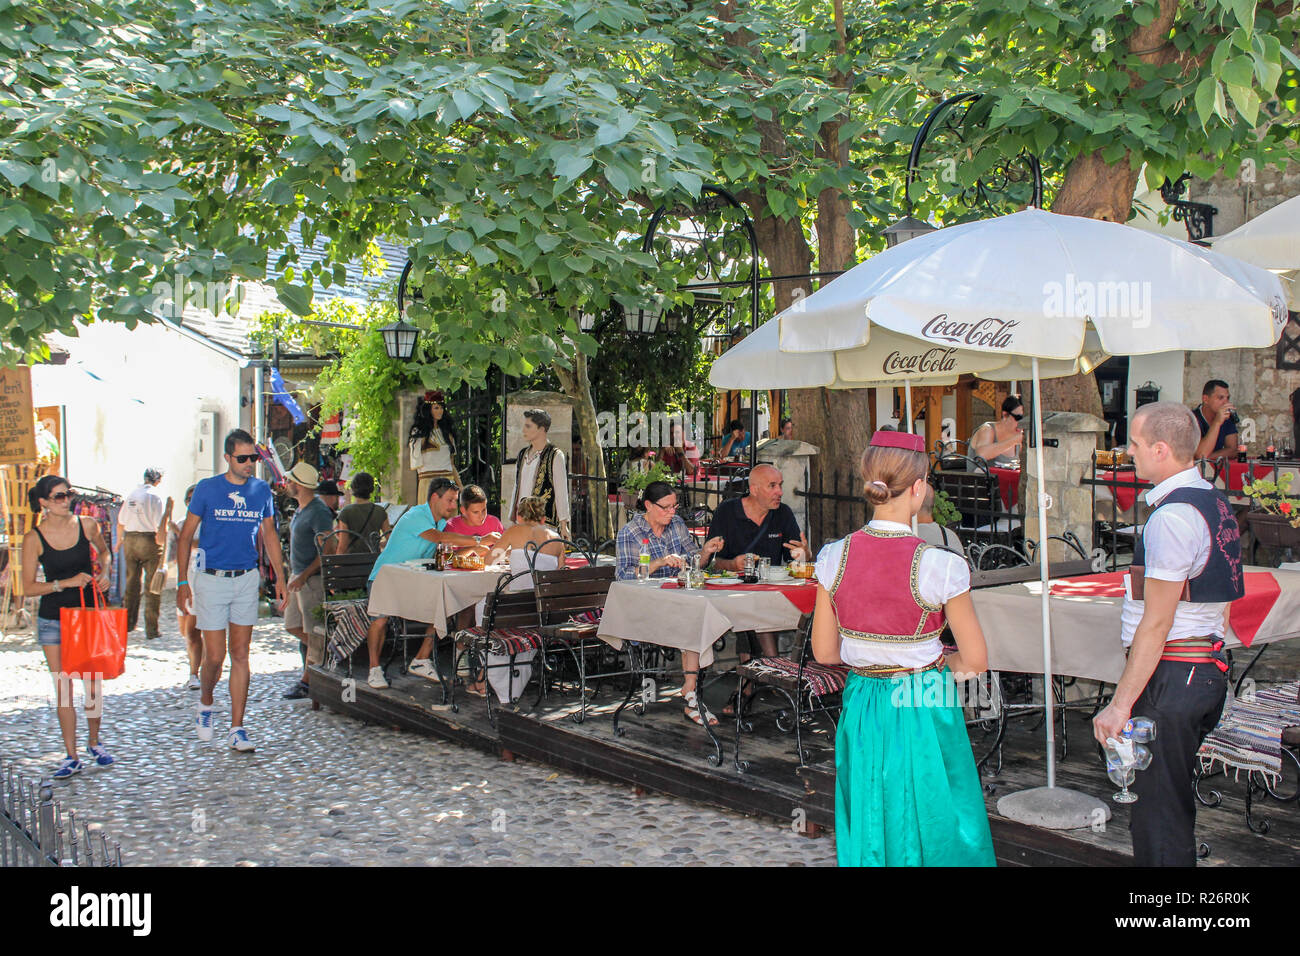 August 2013, Mostar. Outdoor restaurant with guests dining out side.  The waiters are dressed in traditonal costumes in the Old Towm. Stock Photo